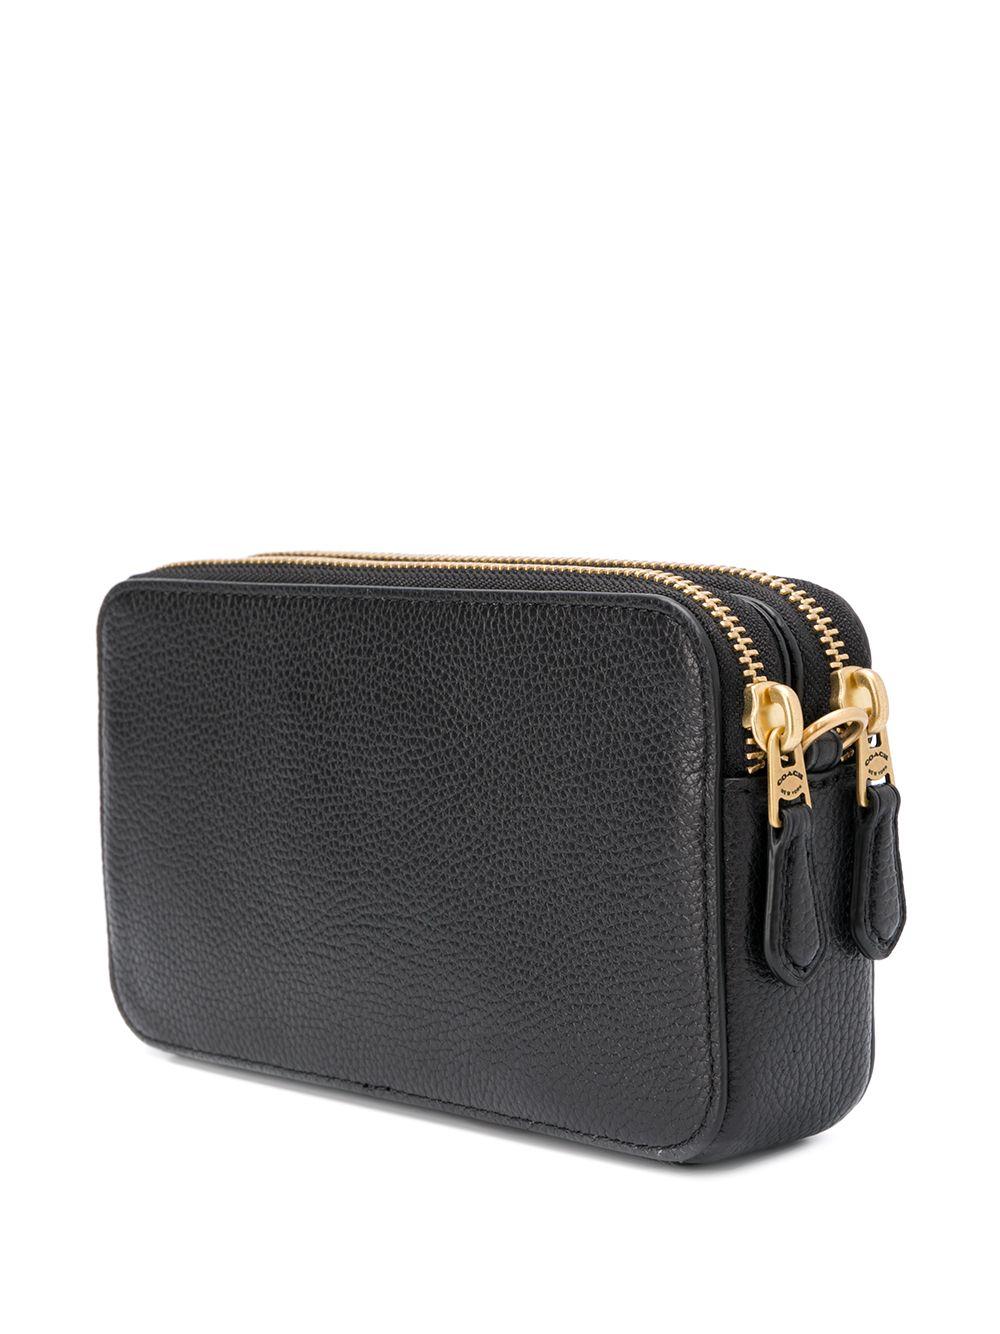 COACH Leather Polisshed Pebble Kira Crossbody Bag in Black - Lyst